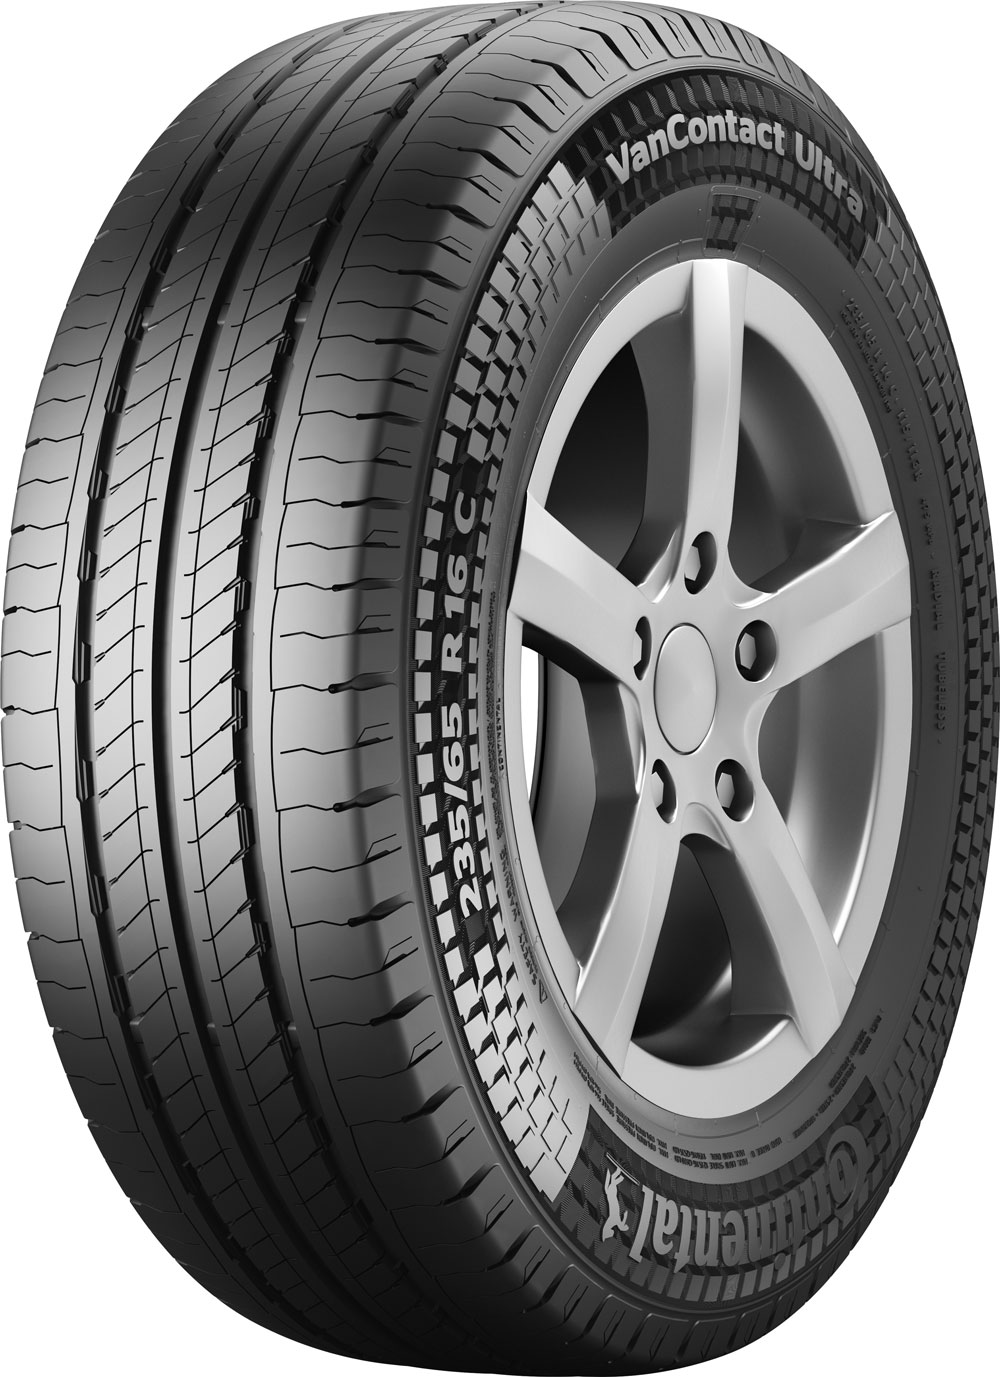 Anvelope microbuz CONTINENTAL VanContact Ultra 195/60 R16 99H